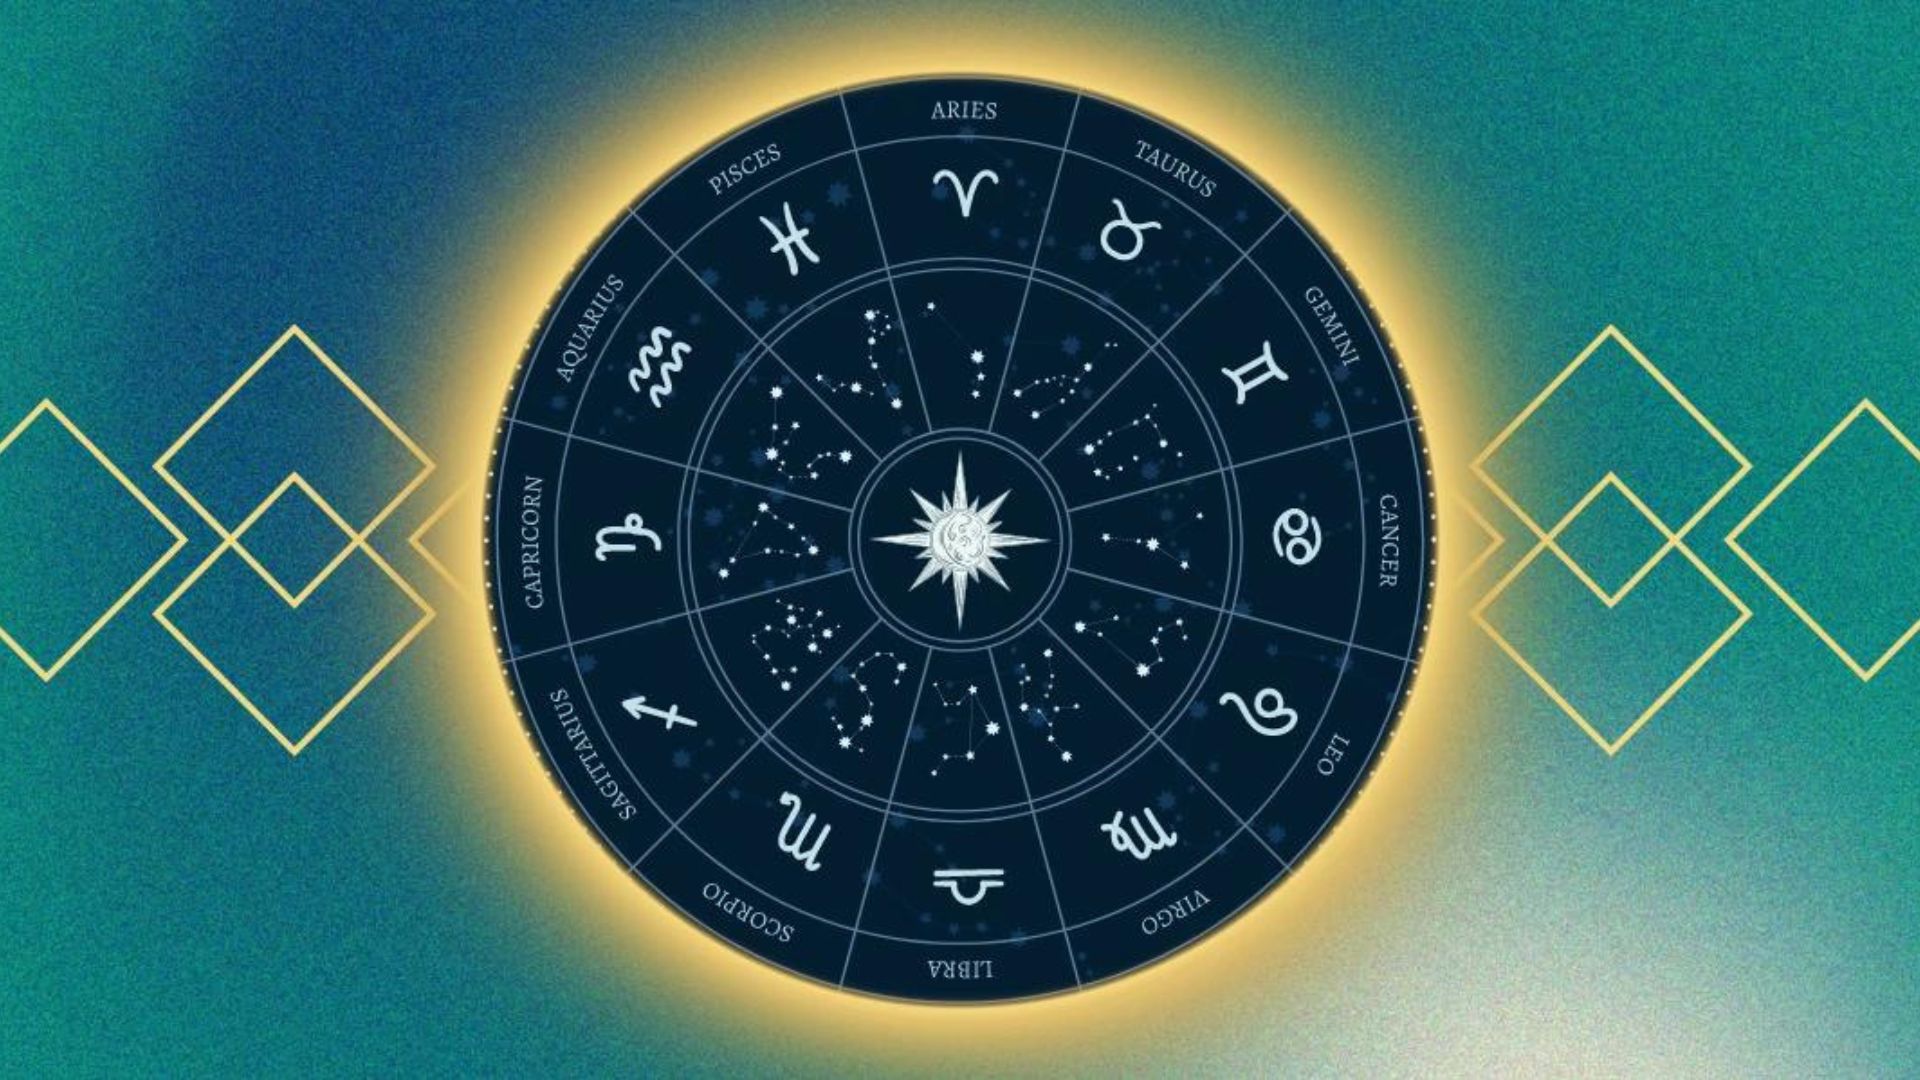 Zodiac Signs In Circle And Sun In Center Of Circle